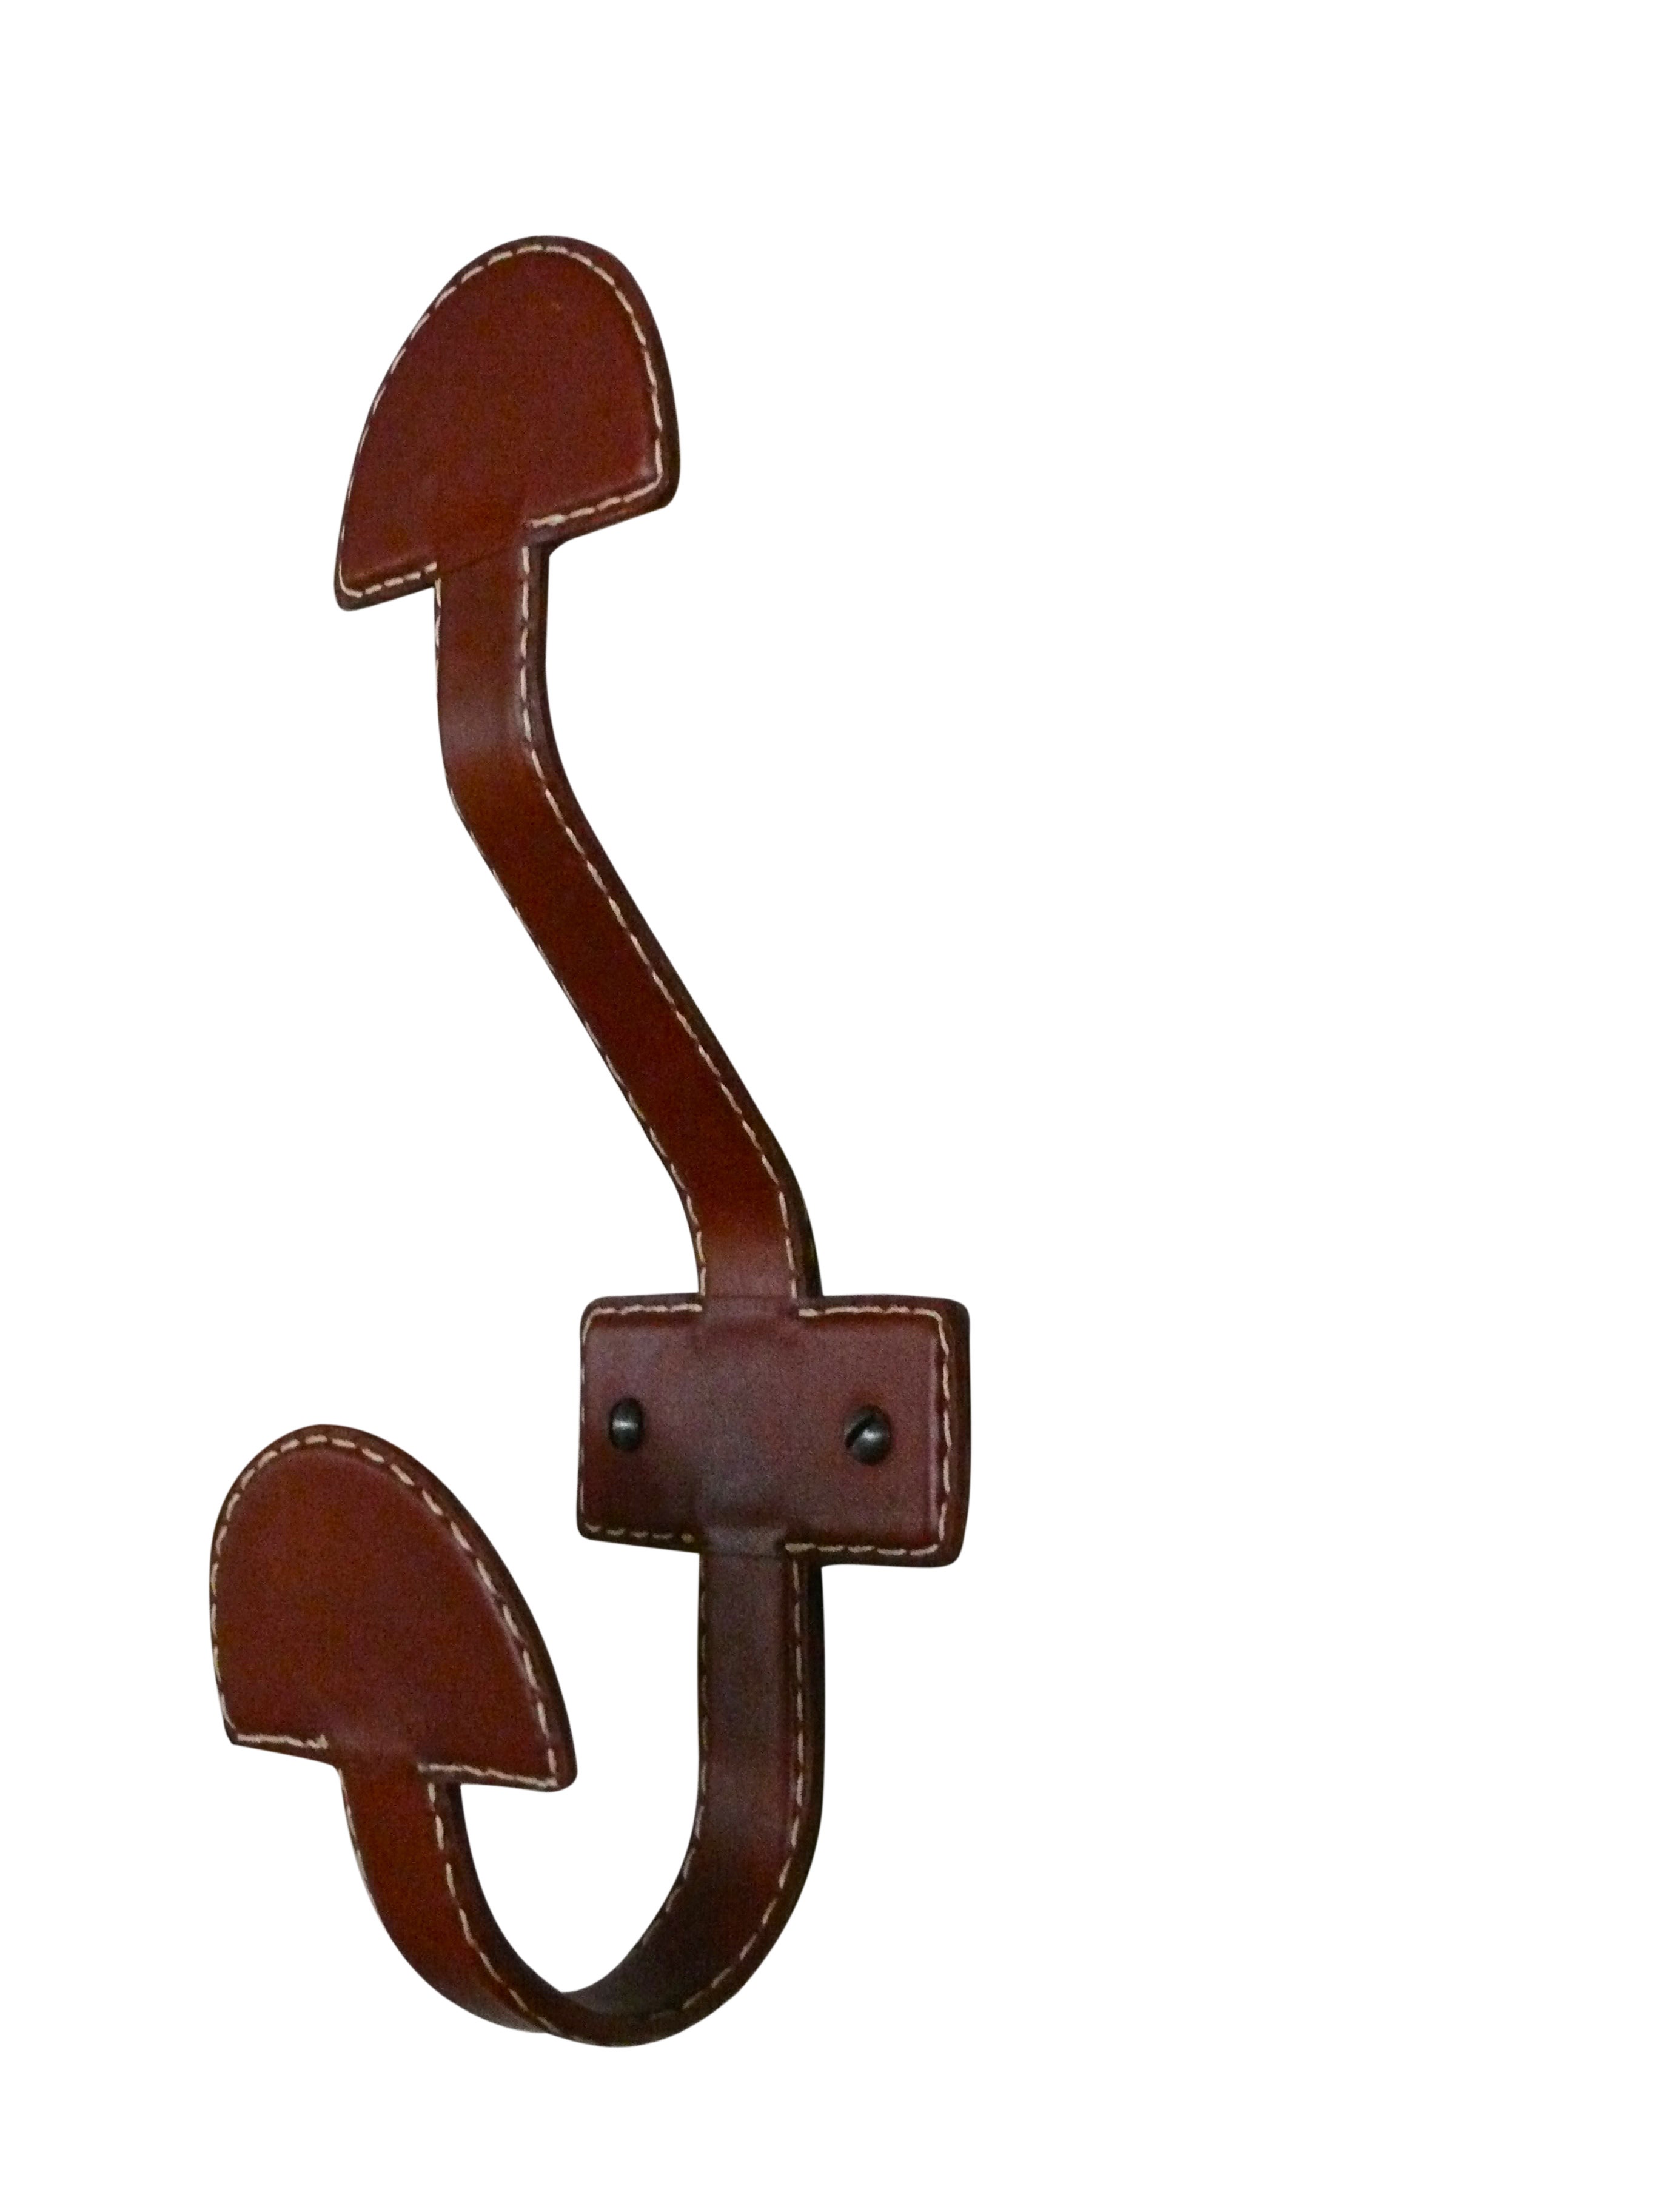 Leather Hook in the style of Adnet